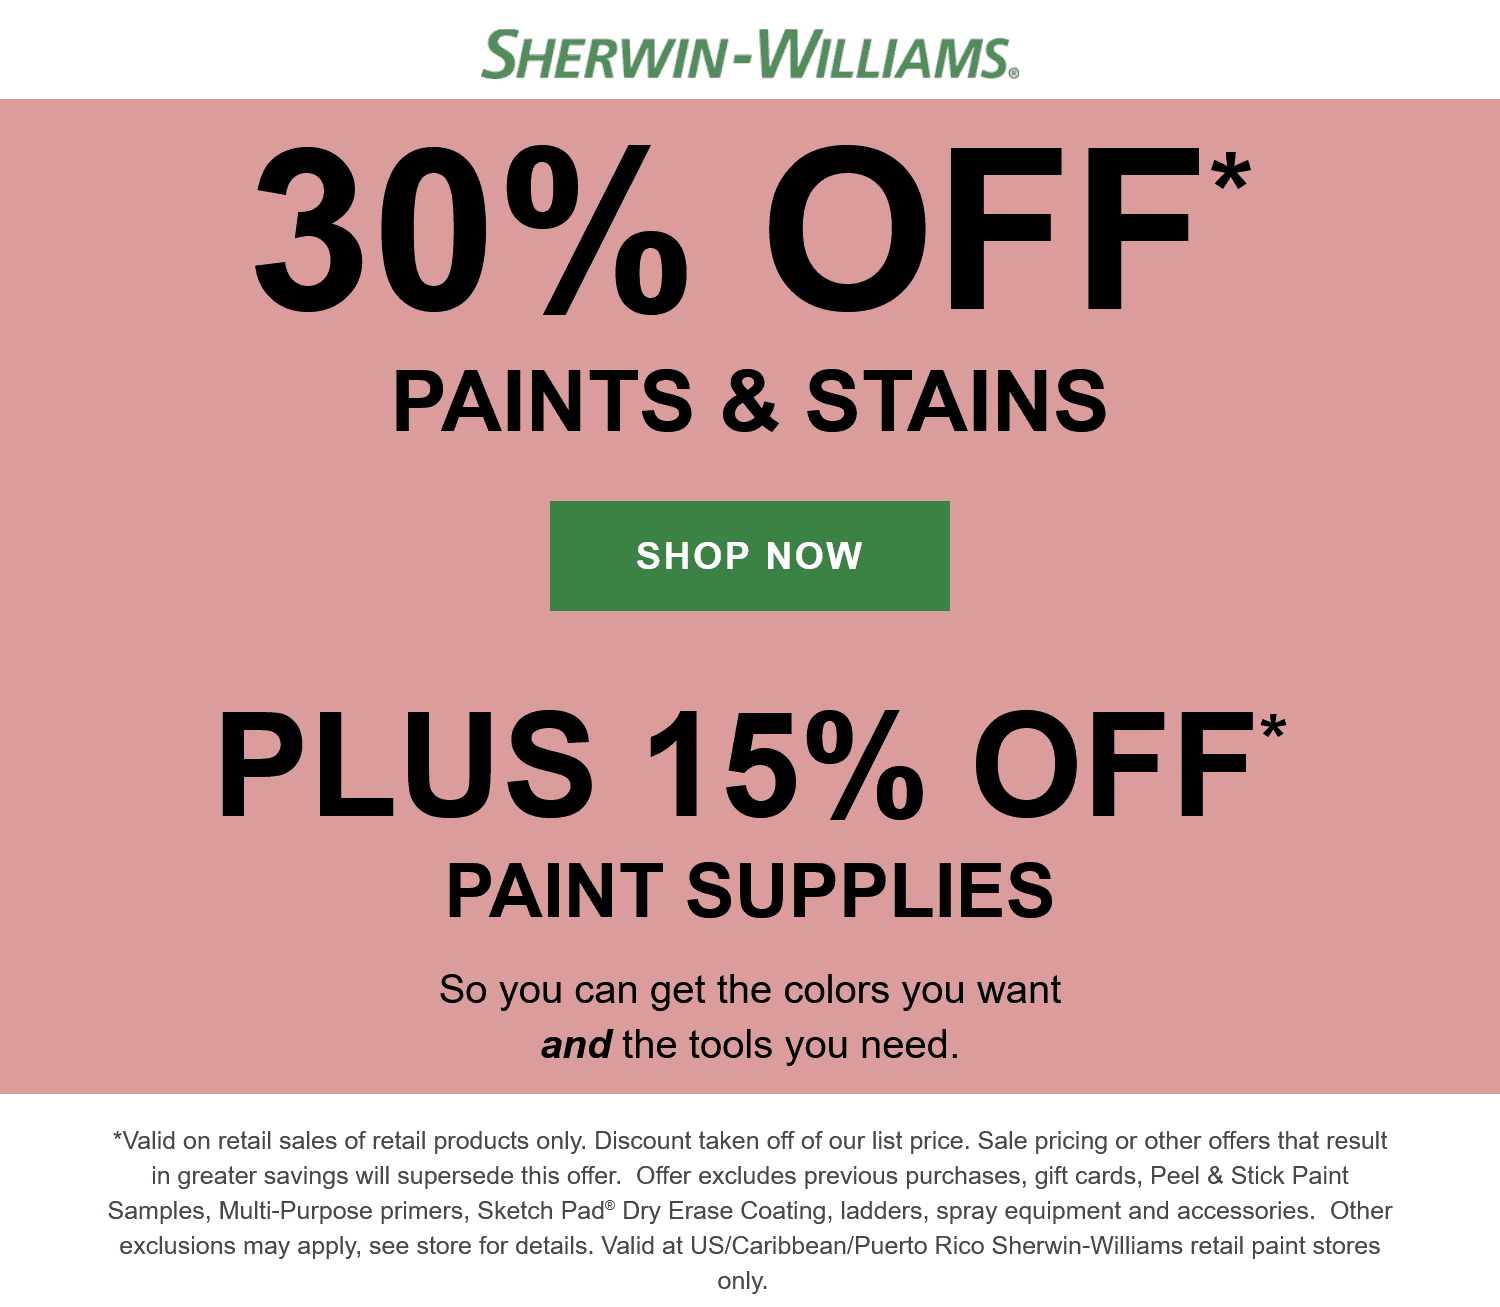 Sherwin Williams stores Coupon  15% off supplies & 30% off paints at Sherwin Williams #sherwinwilliams 